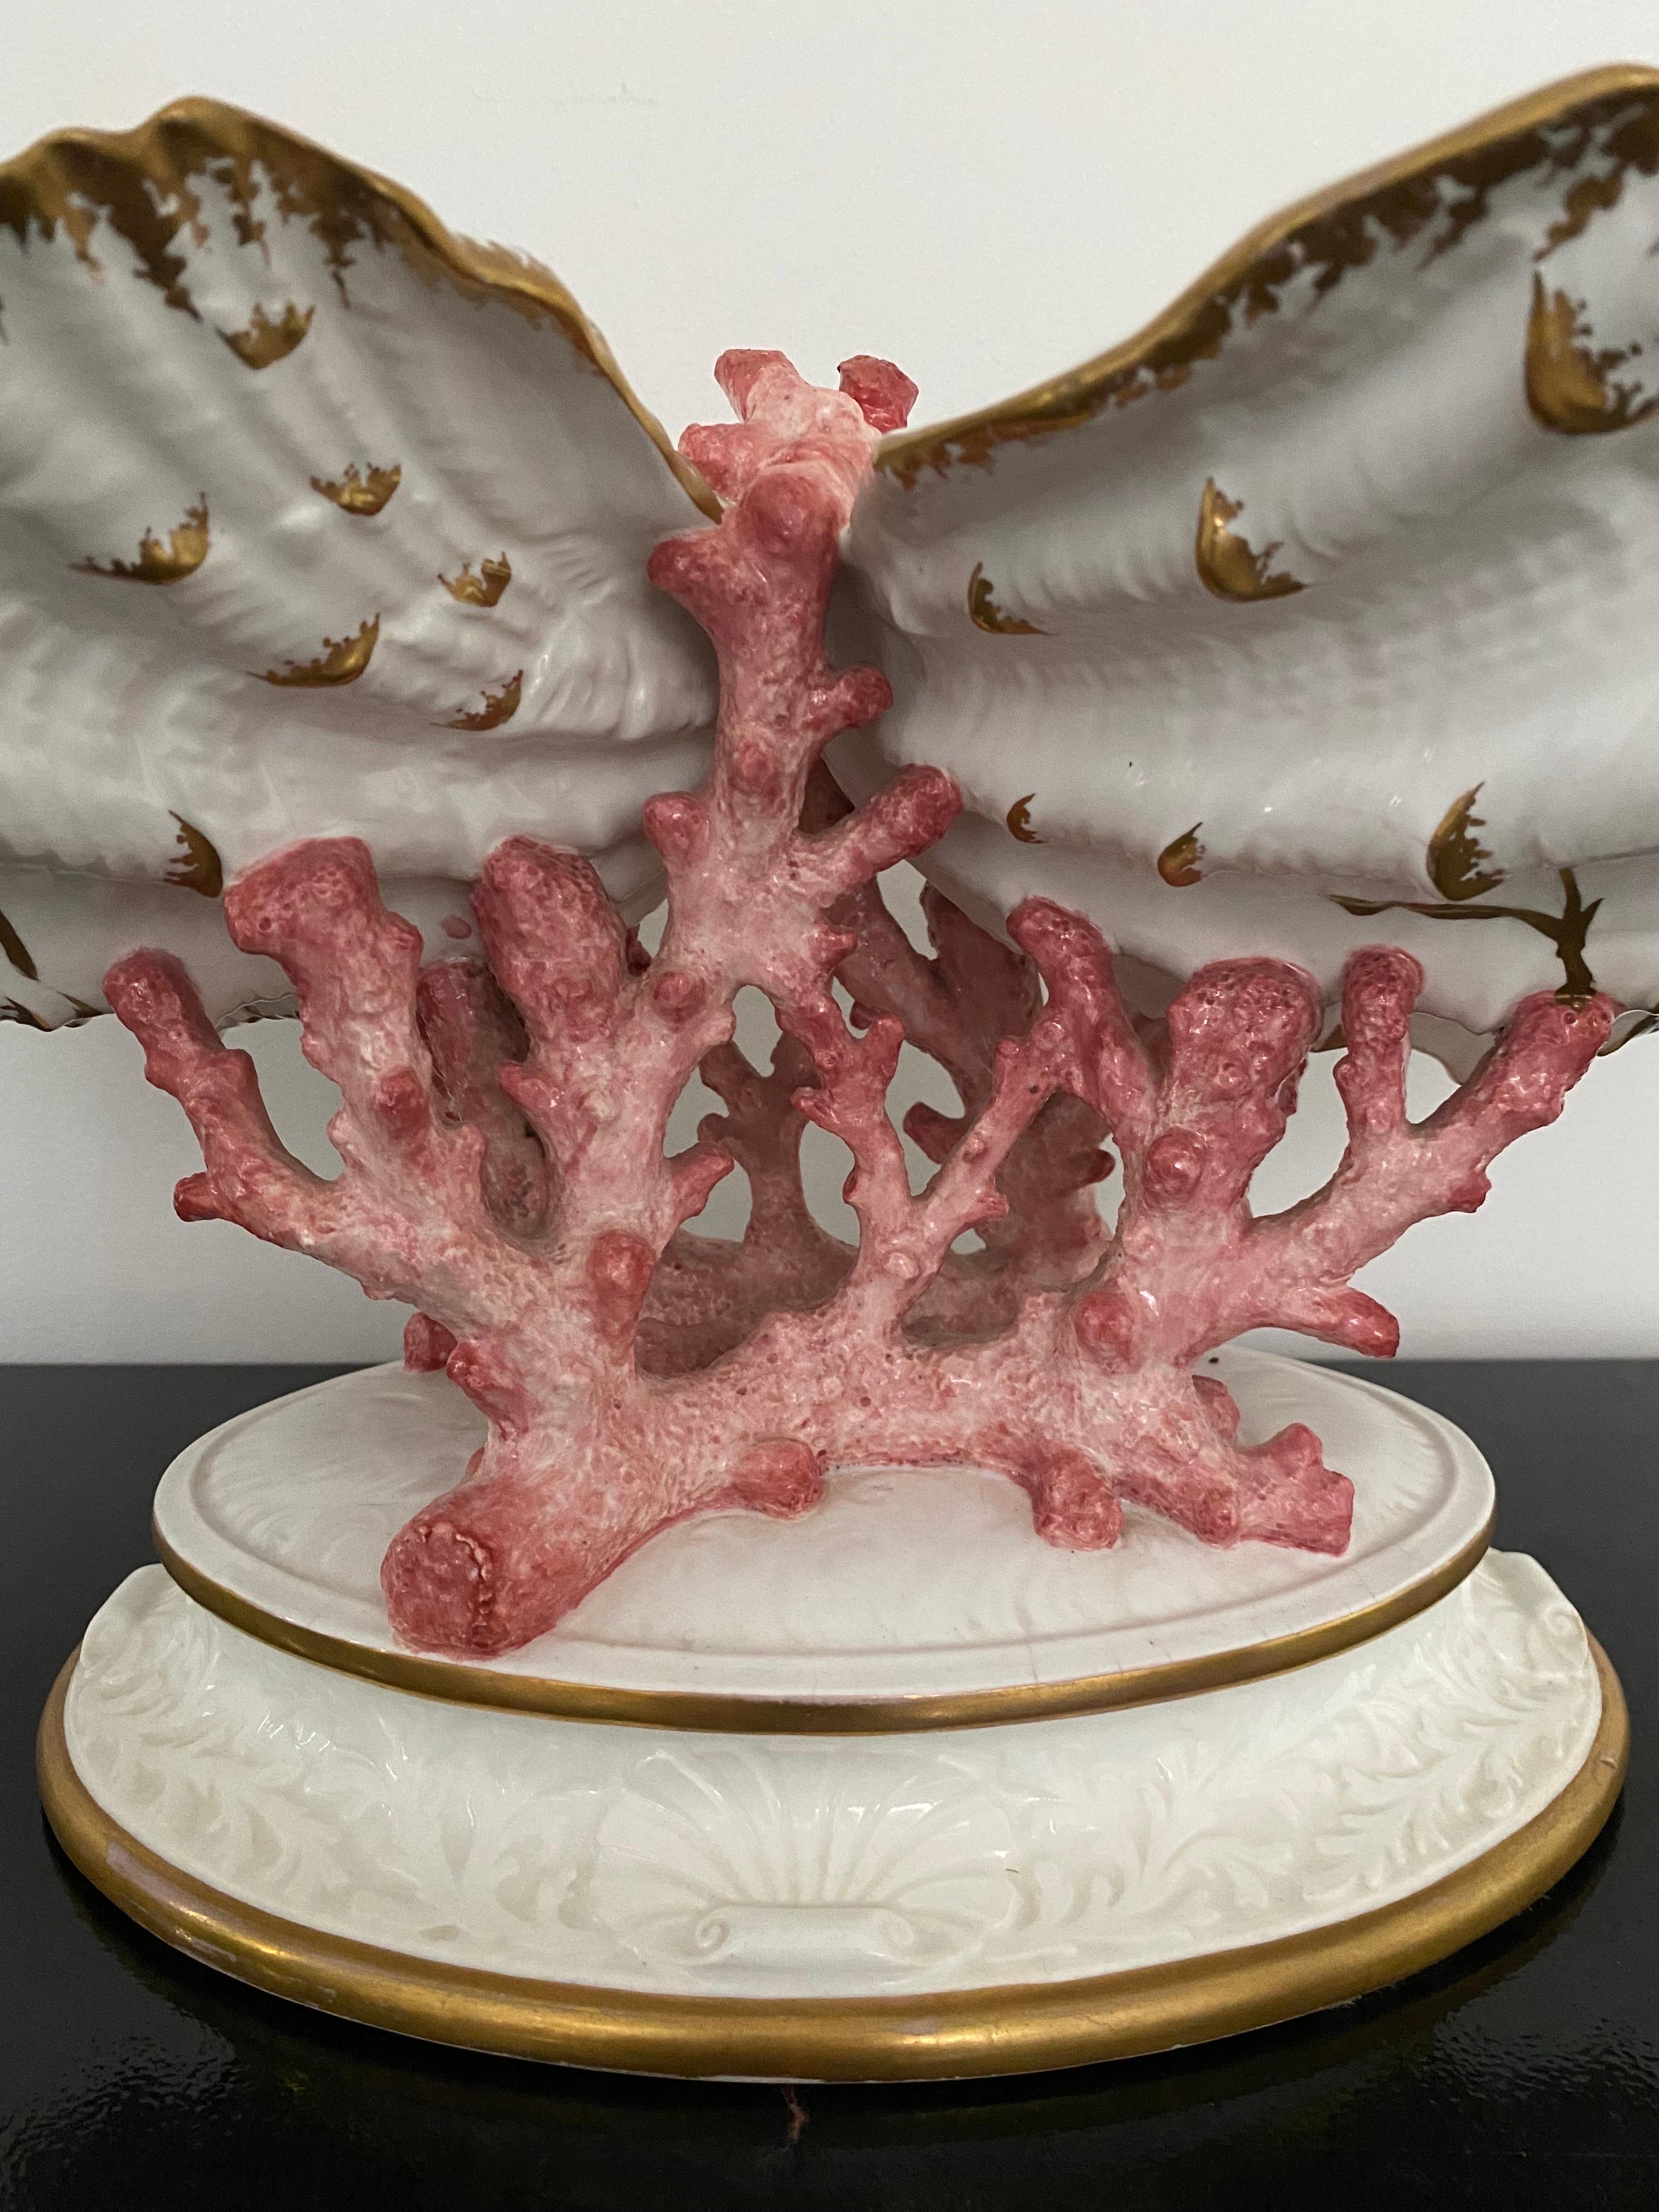 Rare Wedgwood Coral and Clamshells Decorative Pedestal Table Centerpiece Dish 2